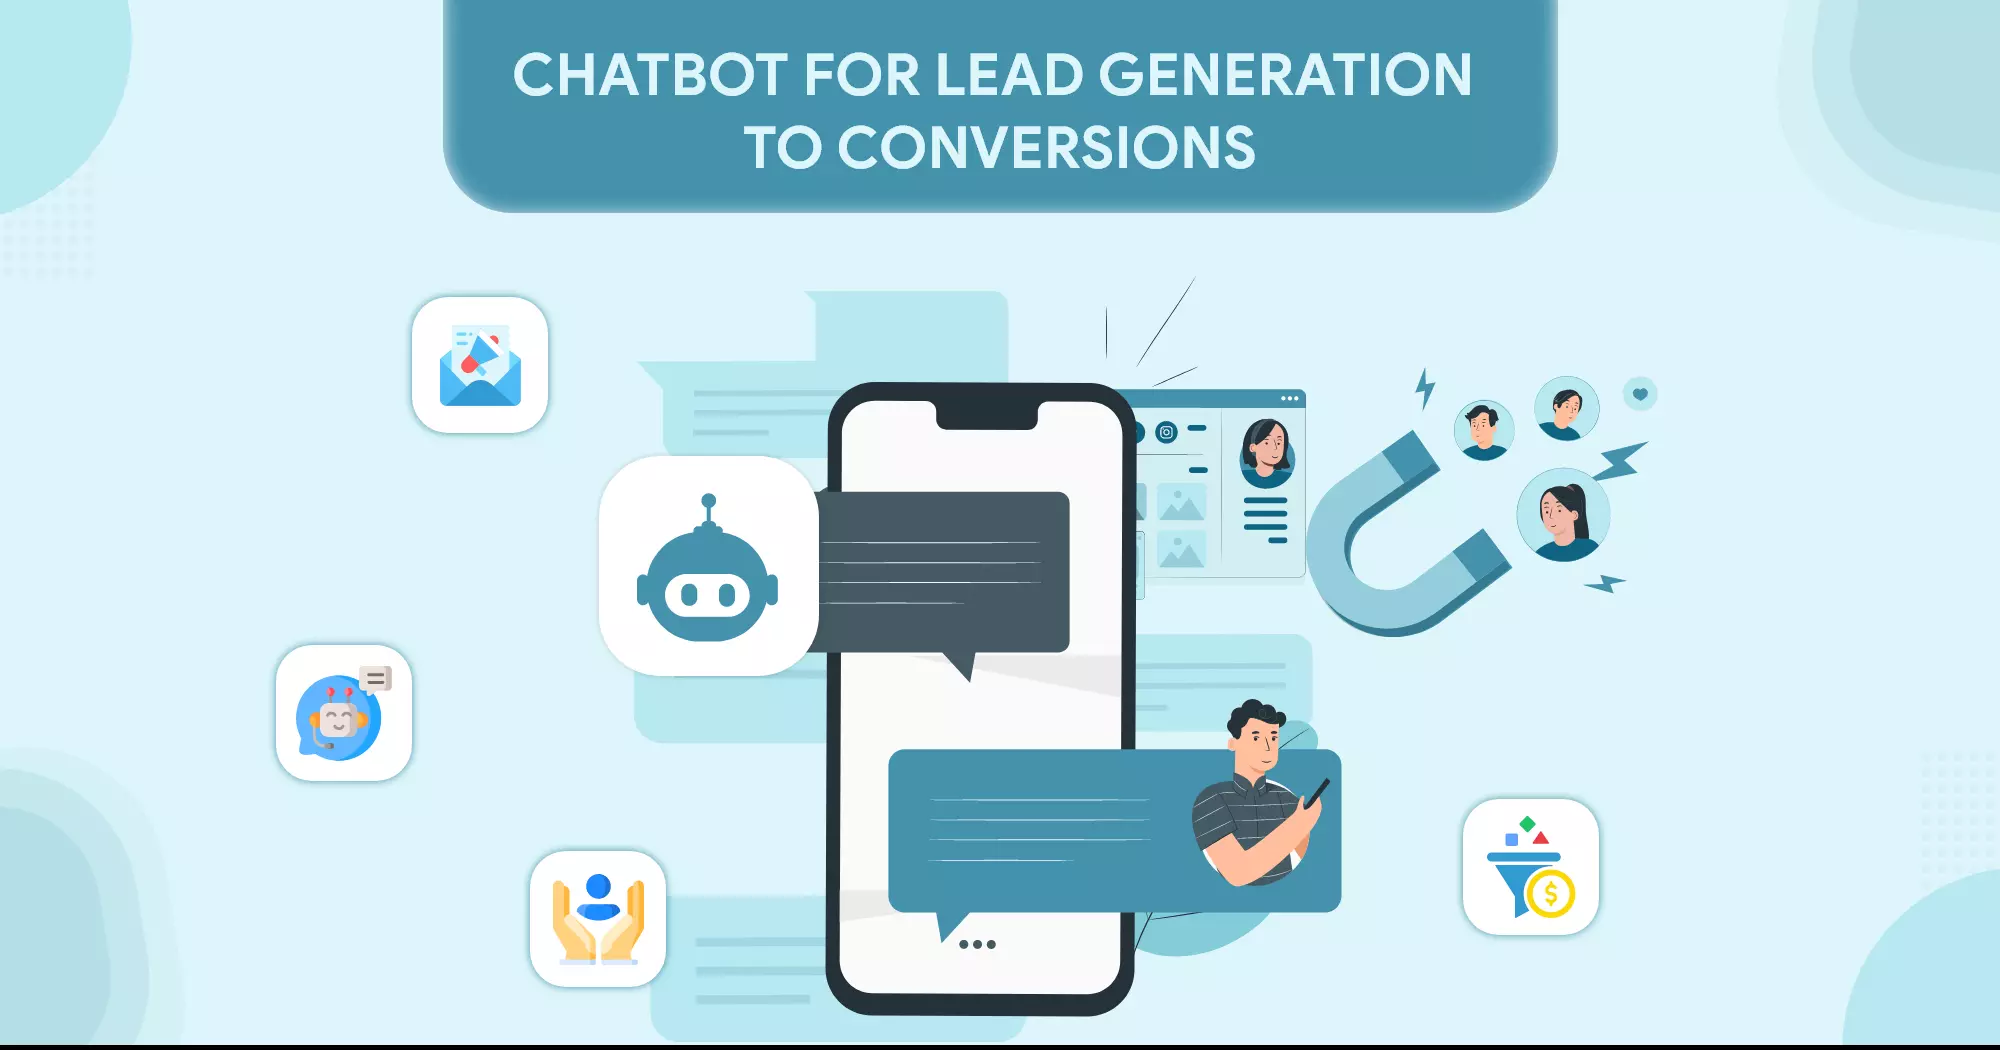 How to leverage Chatbots for Lead Generation to Conversions